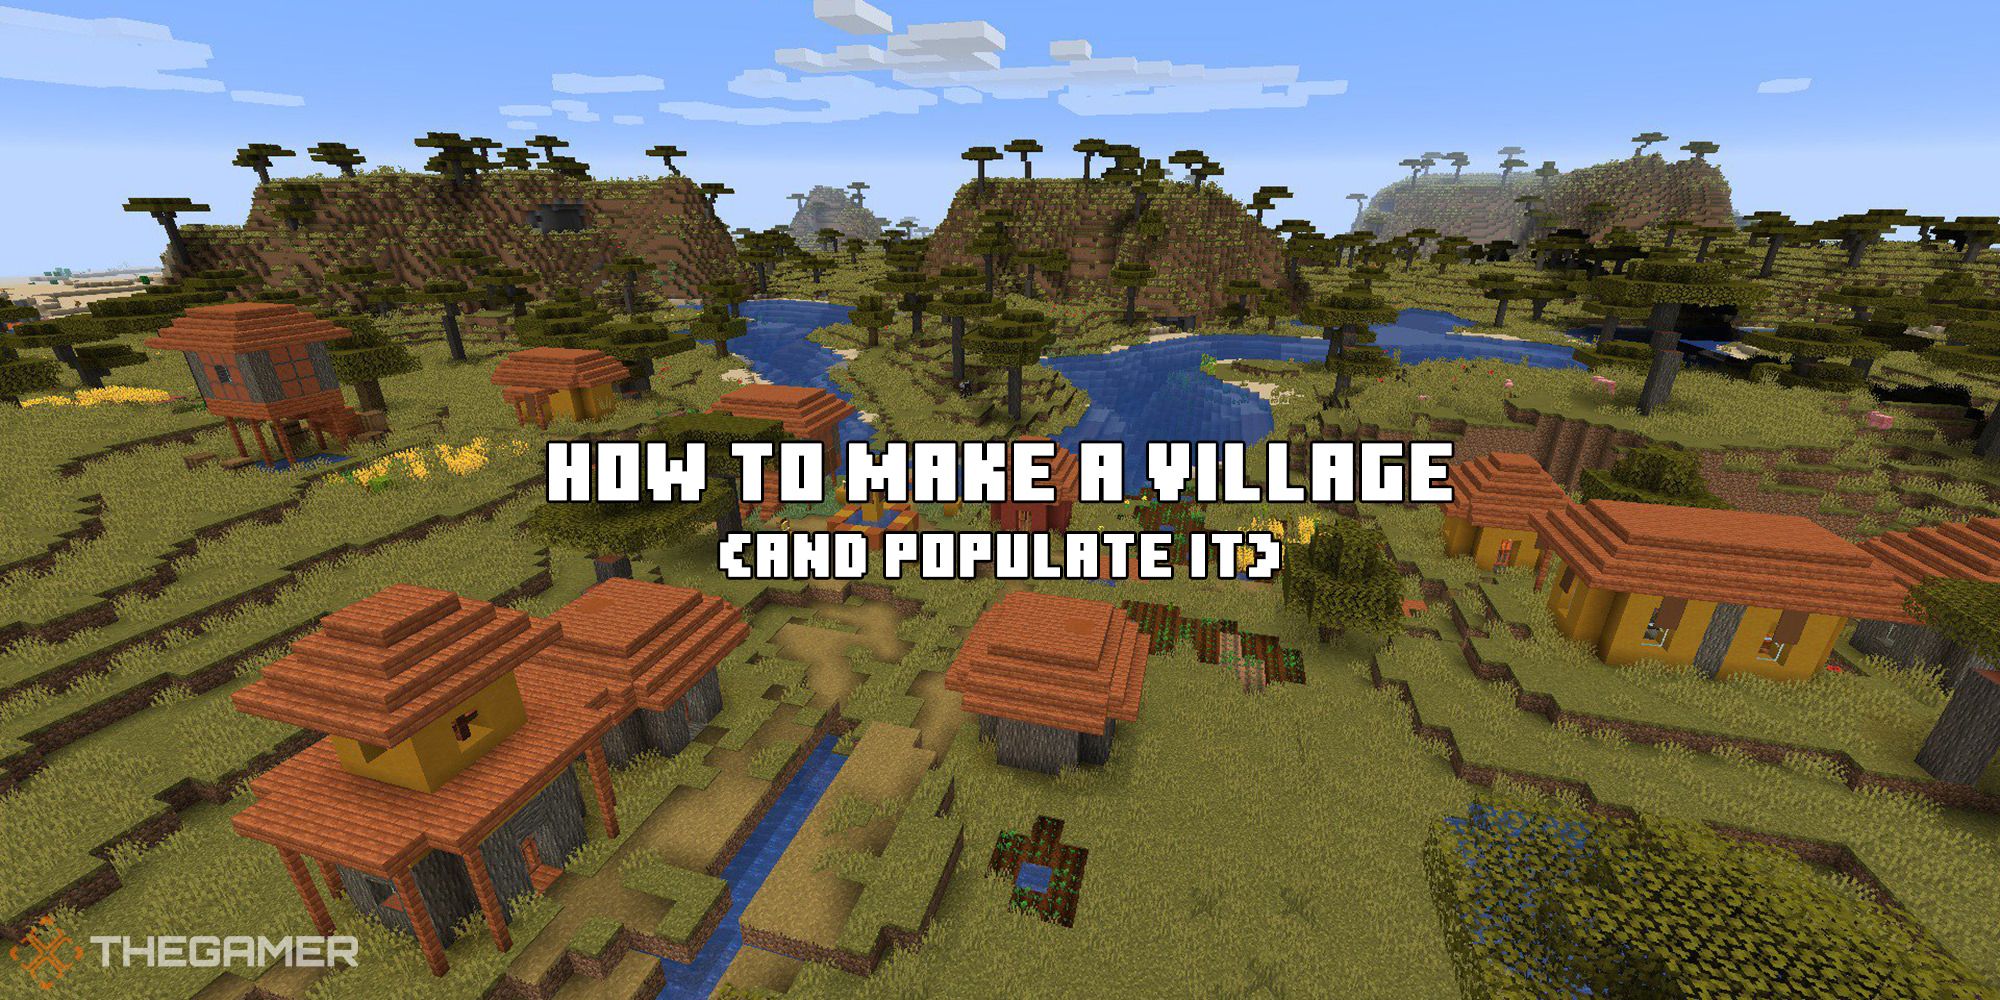 Minecraft: How To Make A Village And Populate It